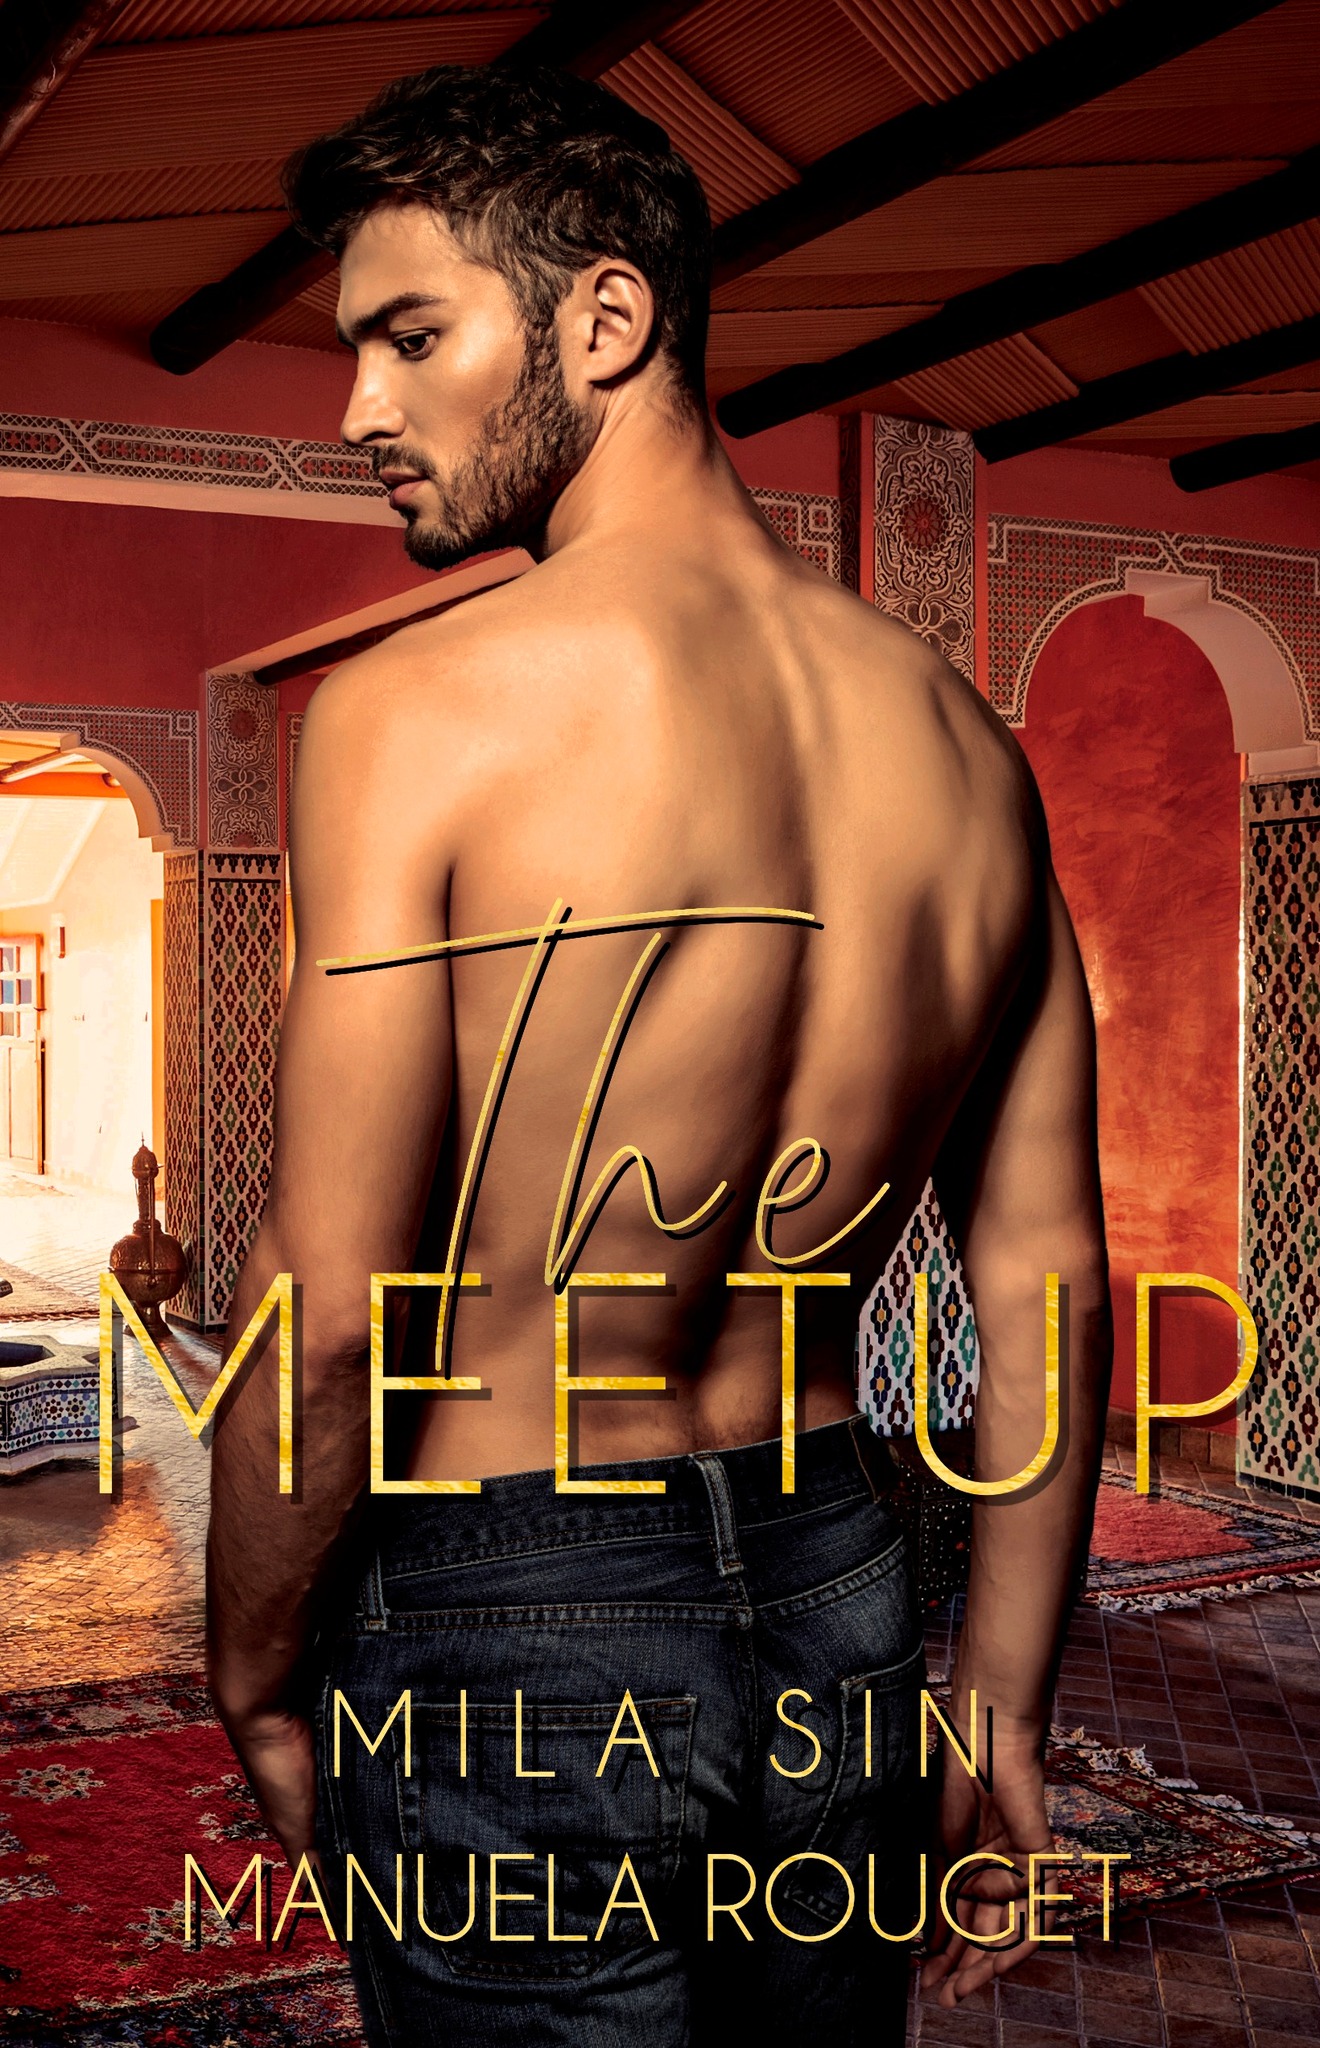 Book Cover: The Meetup by Mila Sin and Manuela Rouget